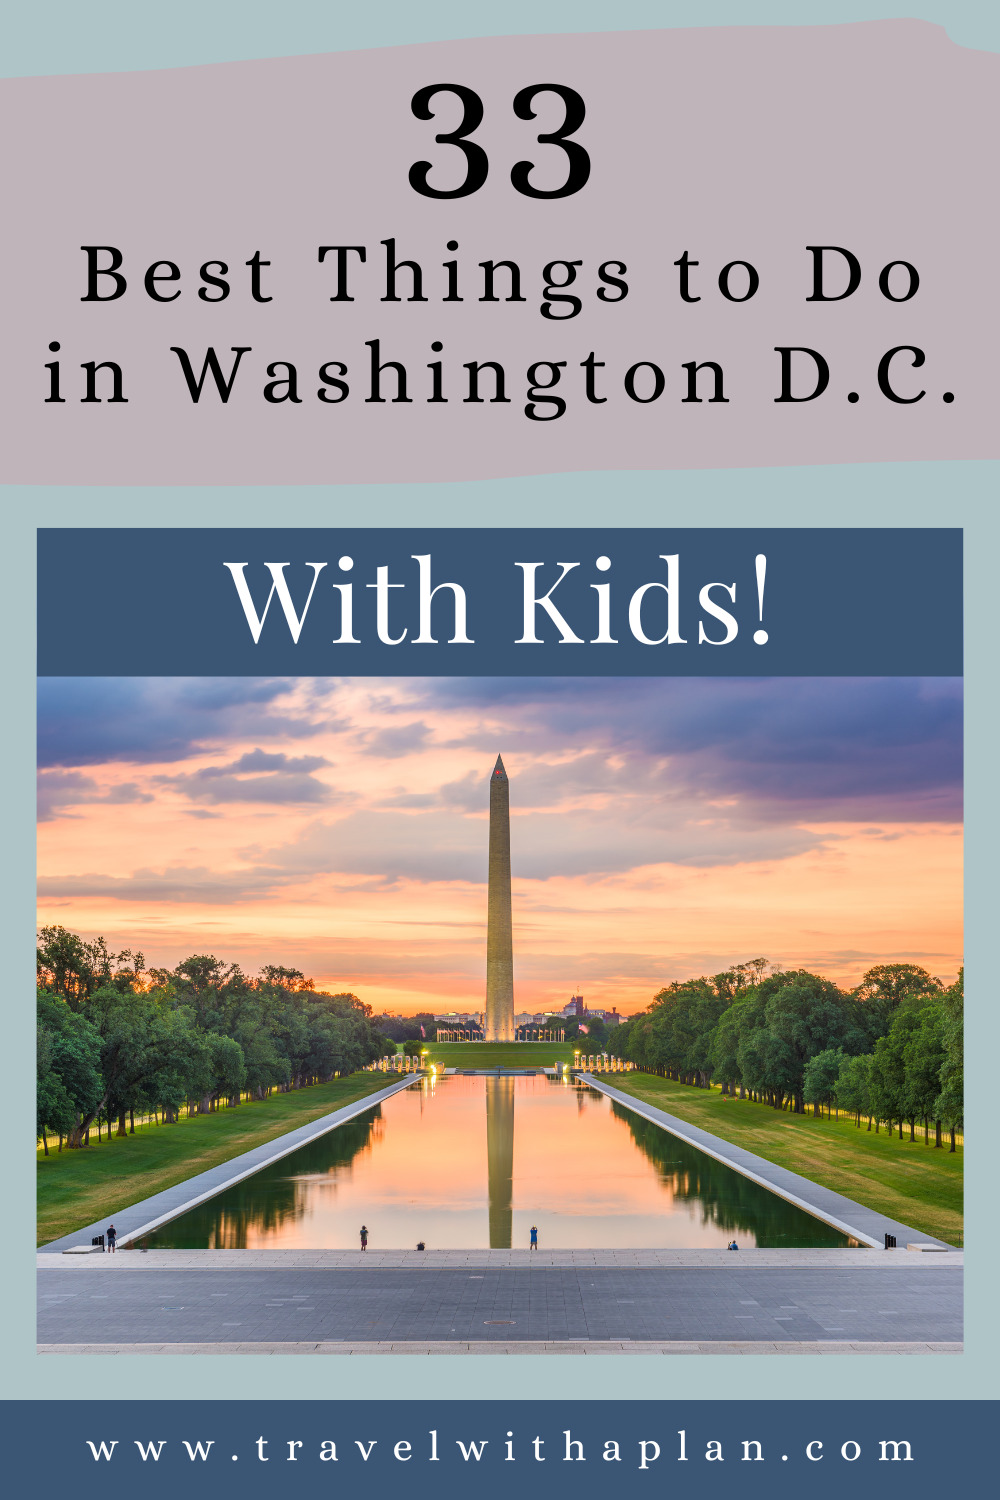 Taking the kids to Washington DC?  Check out our list of fun things to do in Washington DC with kids of all ages!  From monuments, musuems, and outdor parks, you're going to have a blast!  #USAtravel #familyvacations